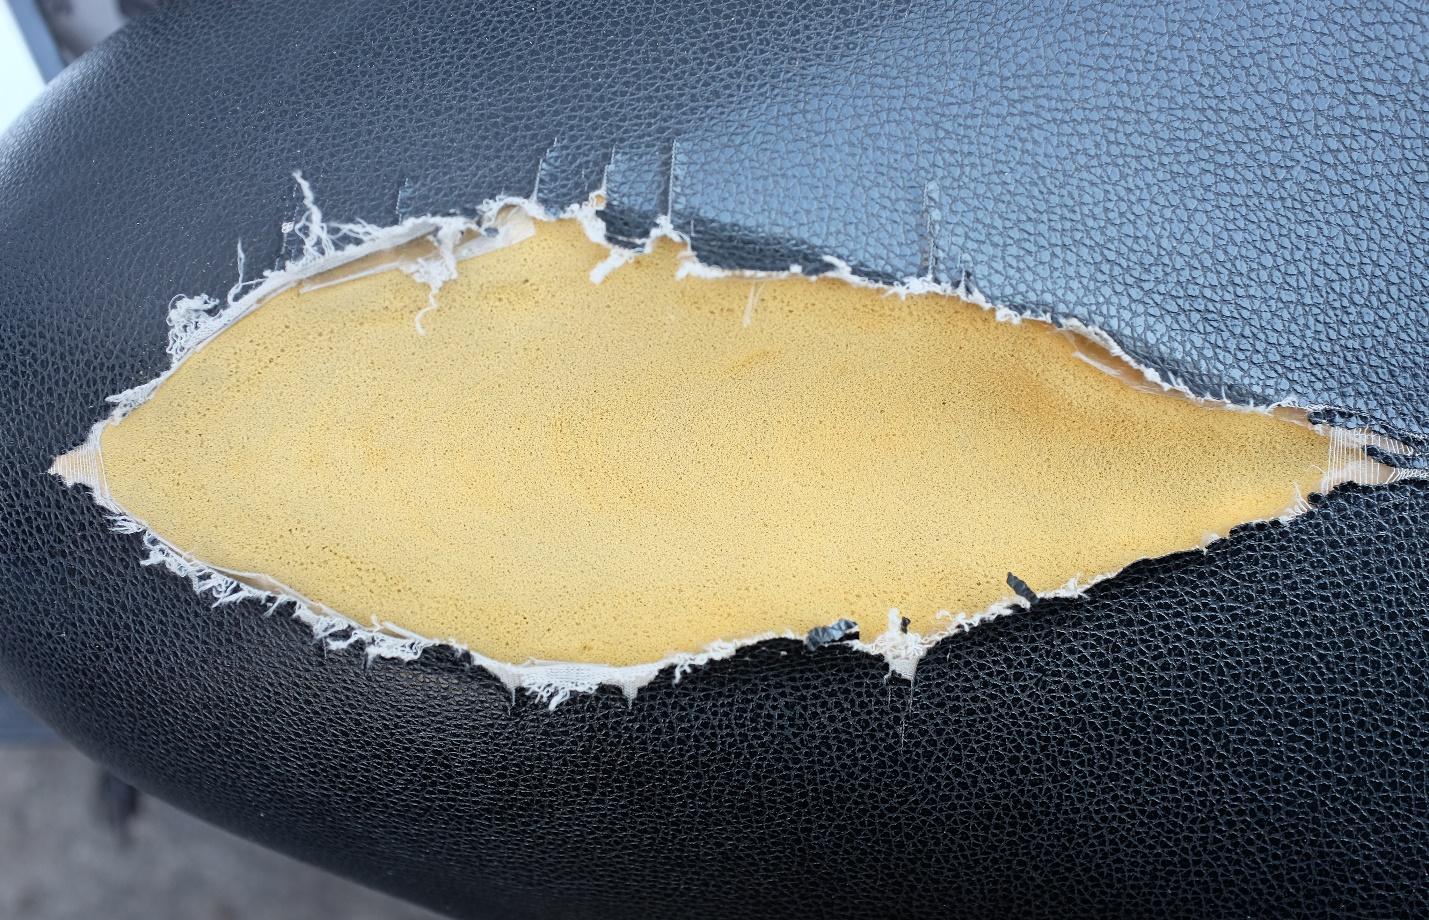 Revolutionize Your HOW TO REPAIR LEATHER CAR SEATS With These Easy-peasy Tips